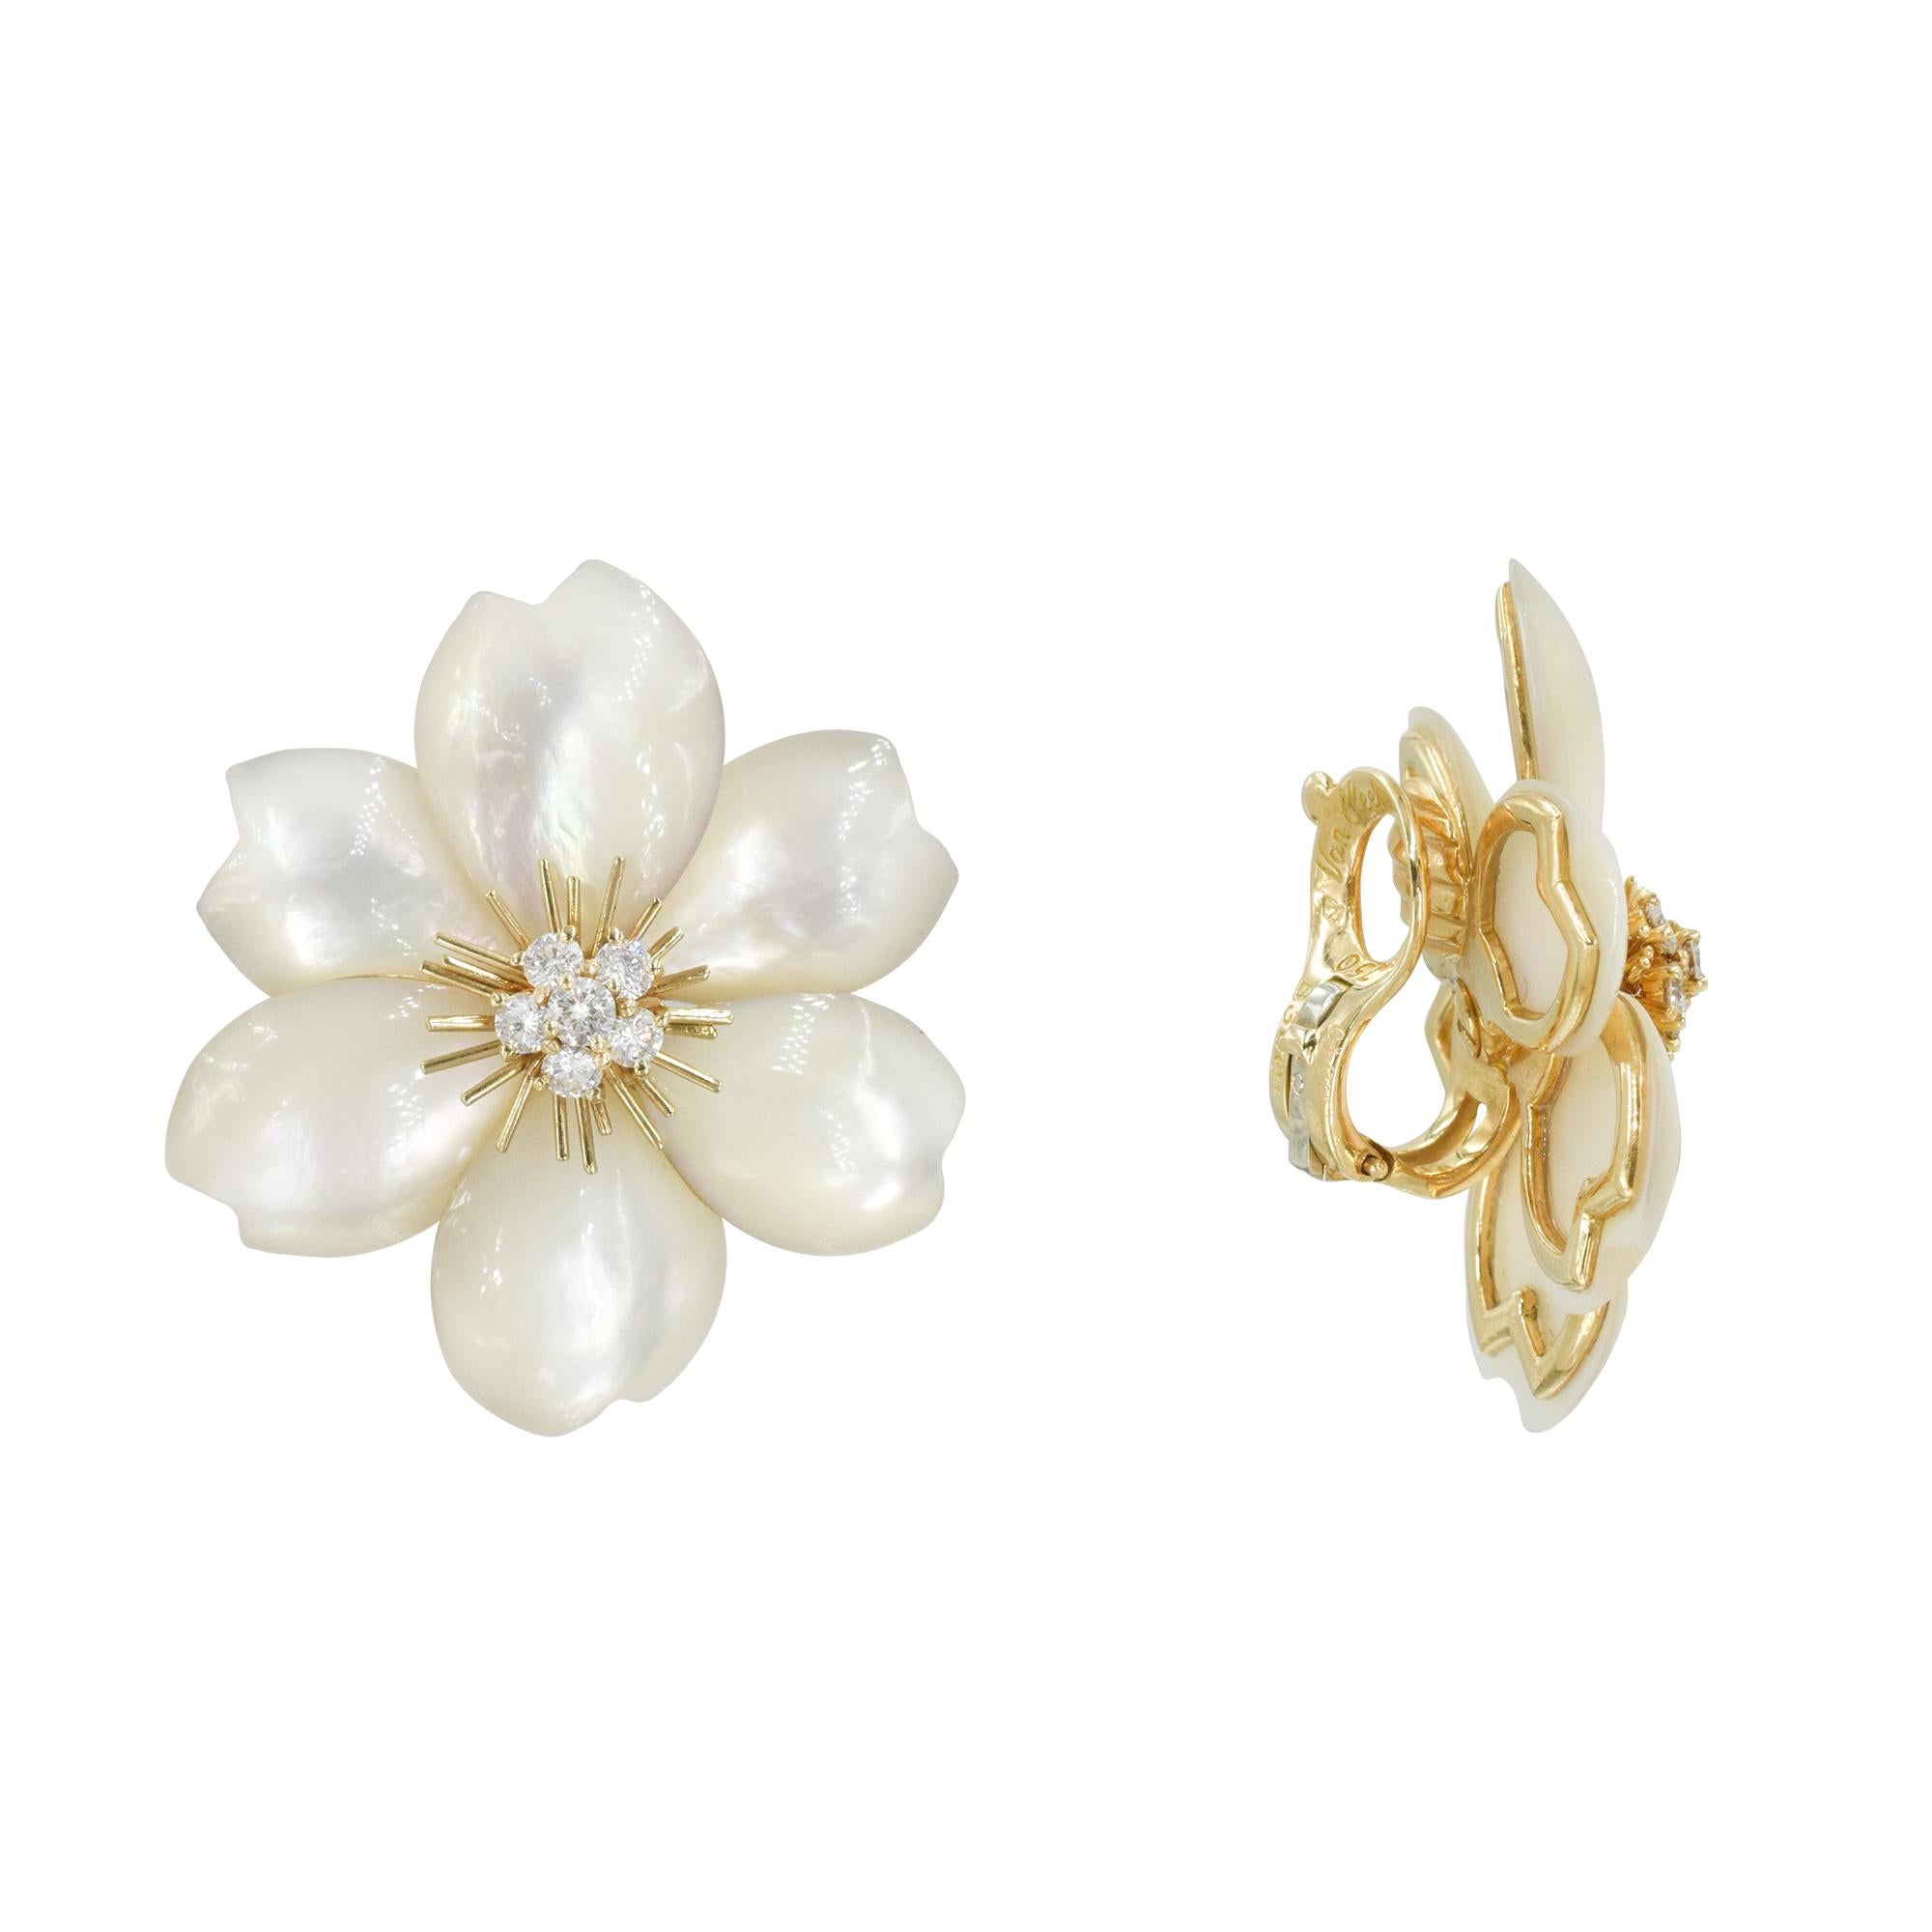 Van Cleef & Arpels large  Mother-of- Pearl 'Rose de Noel' Ear -Clips French  In Excellent Condition For Sale In New York, NY